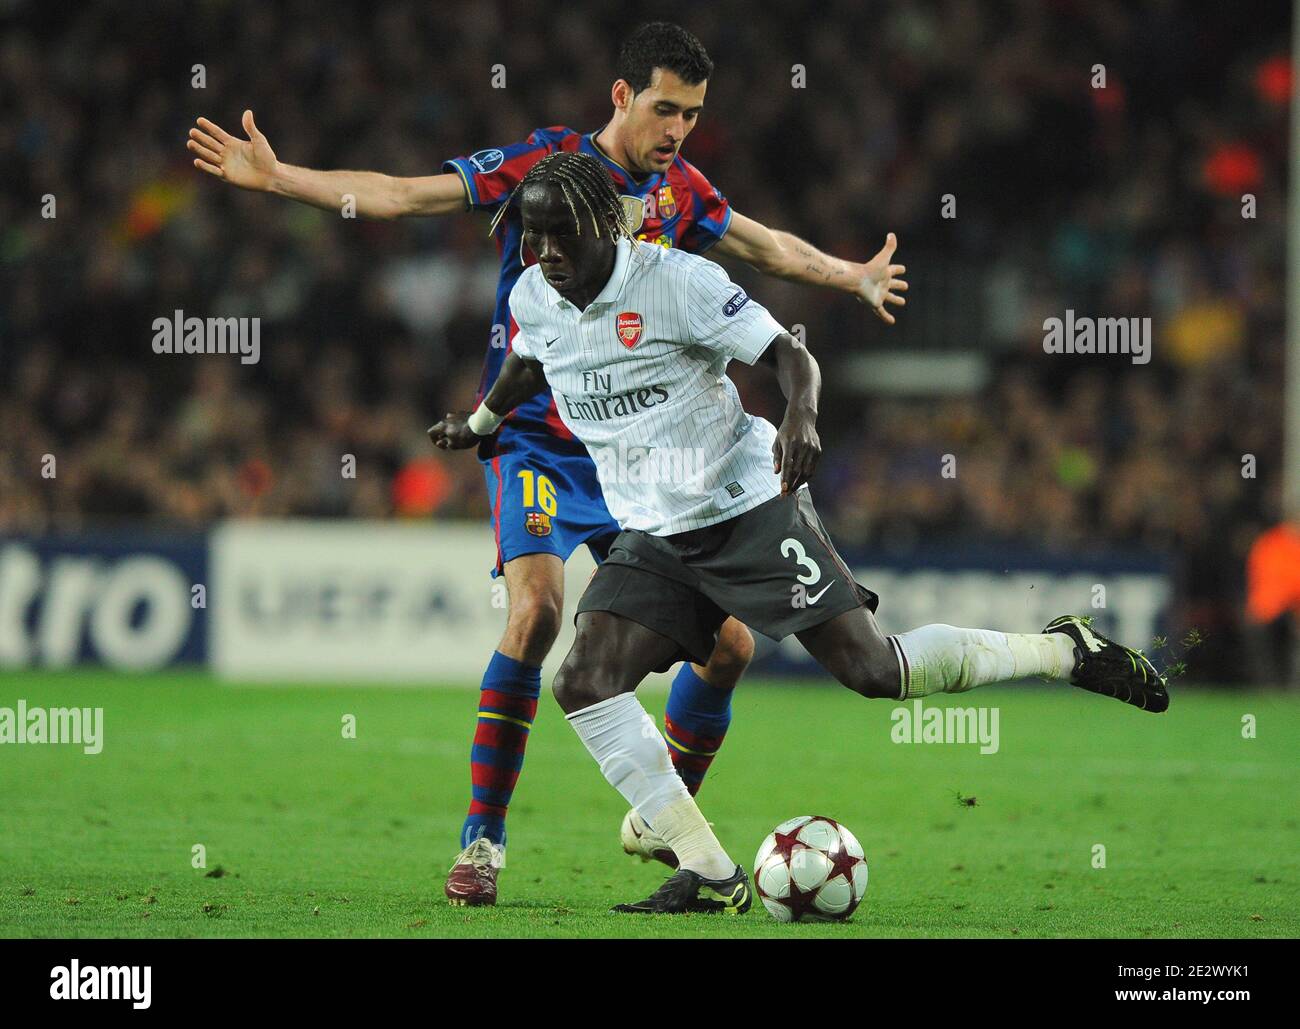 Arsenal's Bacary Sagna challenges Barcelona's Sergi Busquets during the UEFA Champions League,Quarter Final, Second Leg Soccer match, FC Barcelona vs Arsenal at Nou Camp in Barcelona, Spain on March 6, 2010. Barcelona beat Arsenal 4-1 to reach the Champions League semifinals for the third straight year. Photo by Christian Liewig/ABACAPRESS.COM Stock Photo